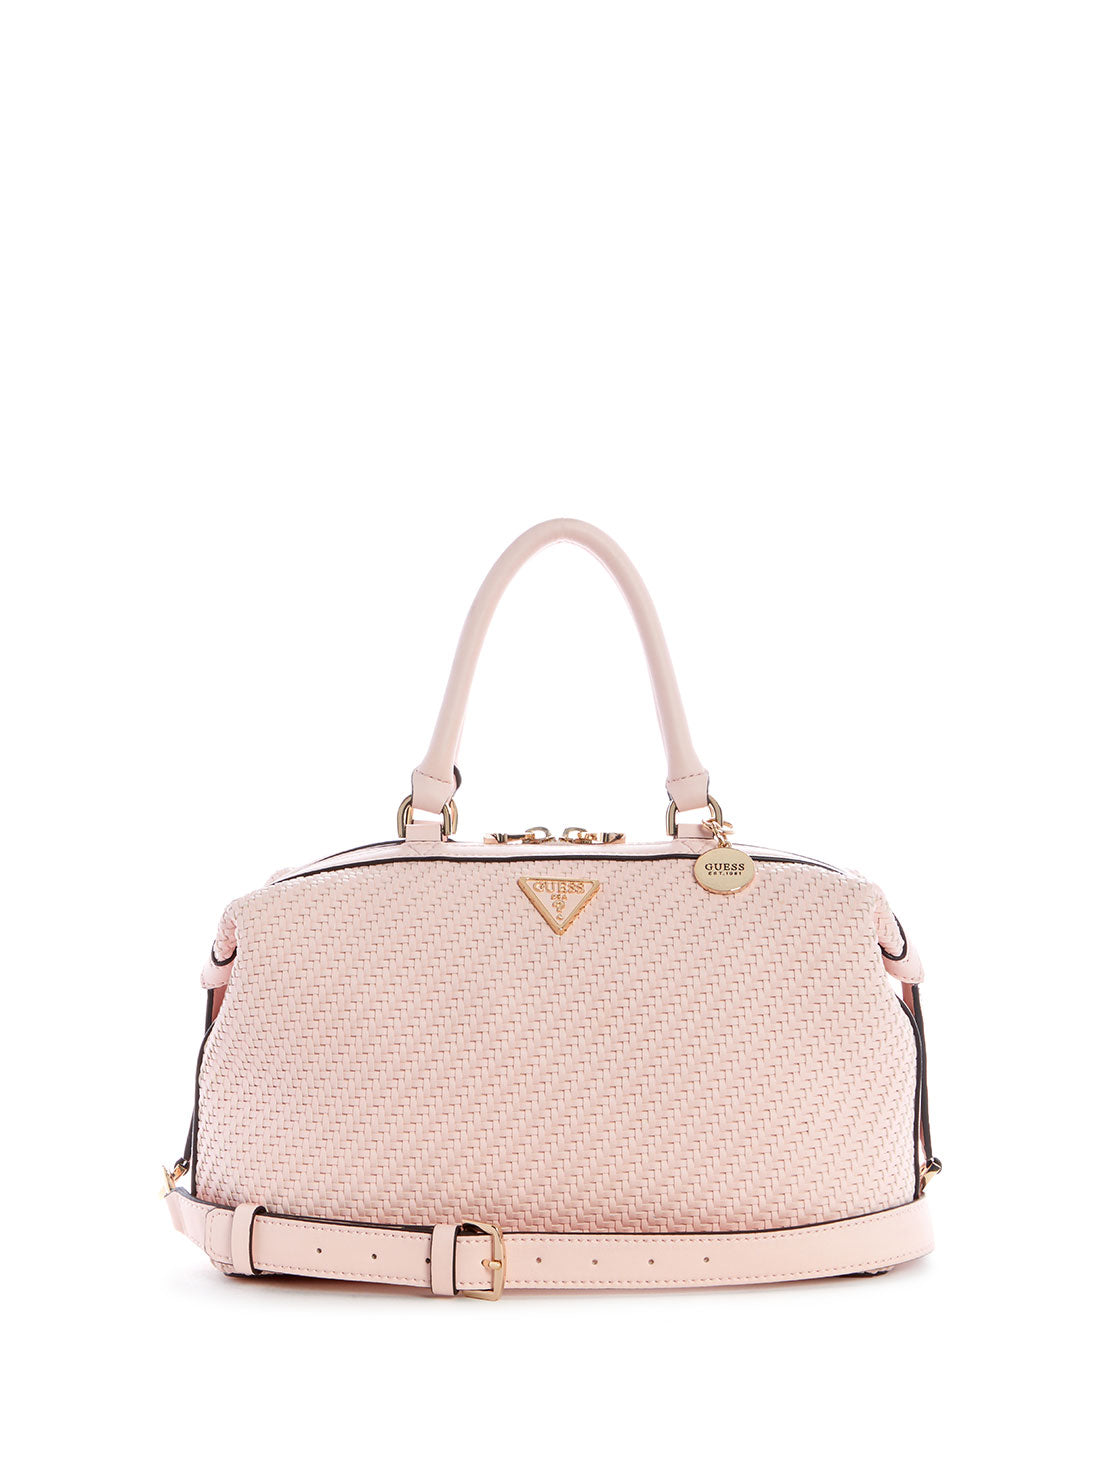 Guess Bags on Sale from £29.99 | Stylight UK